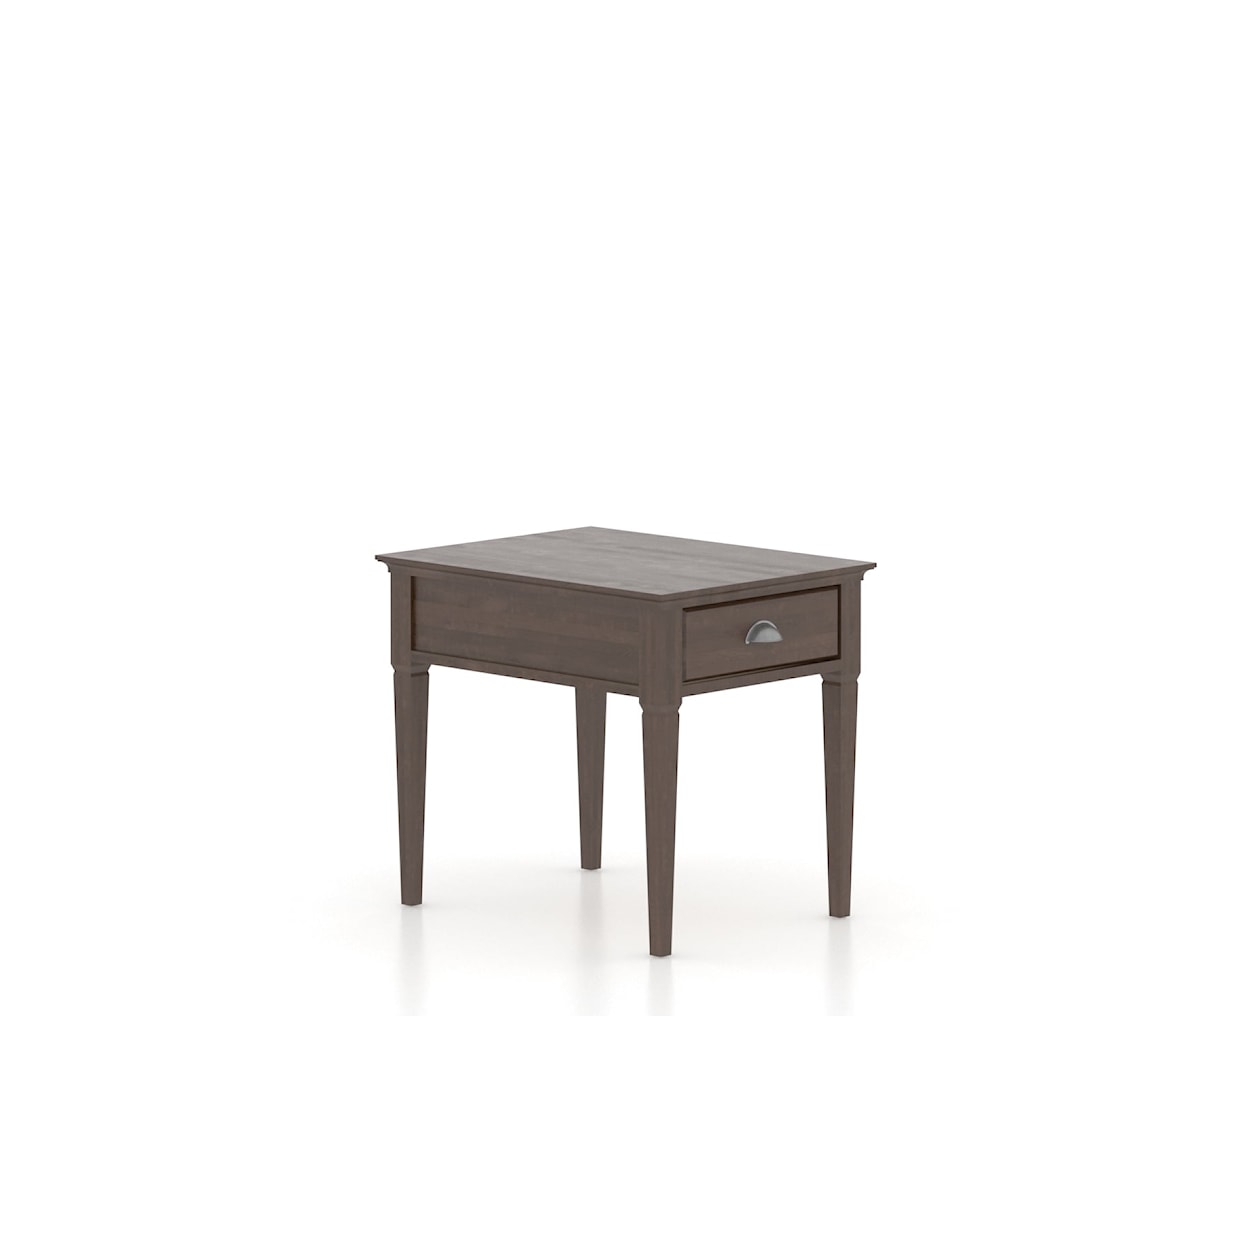 Canadel Accent Littoral Rectangular End Table